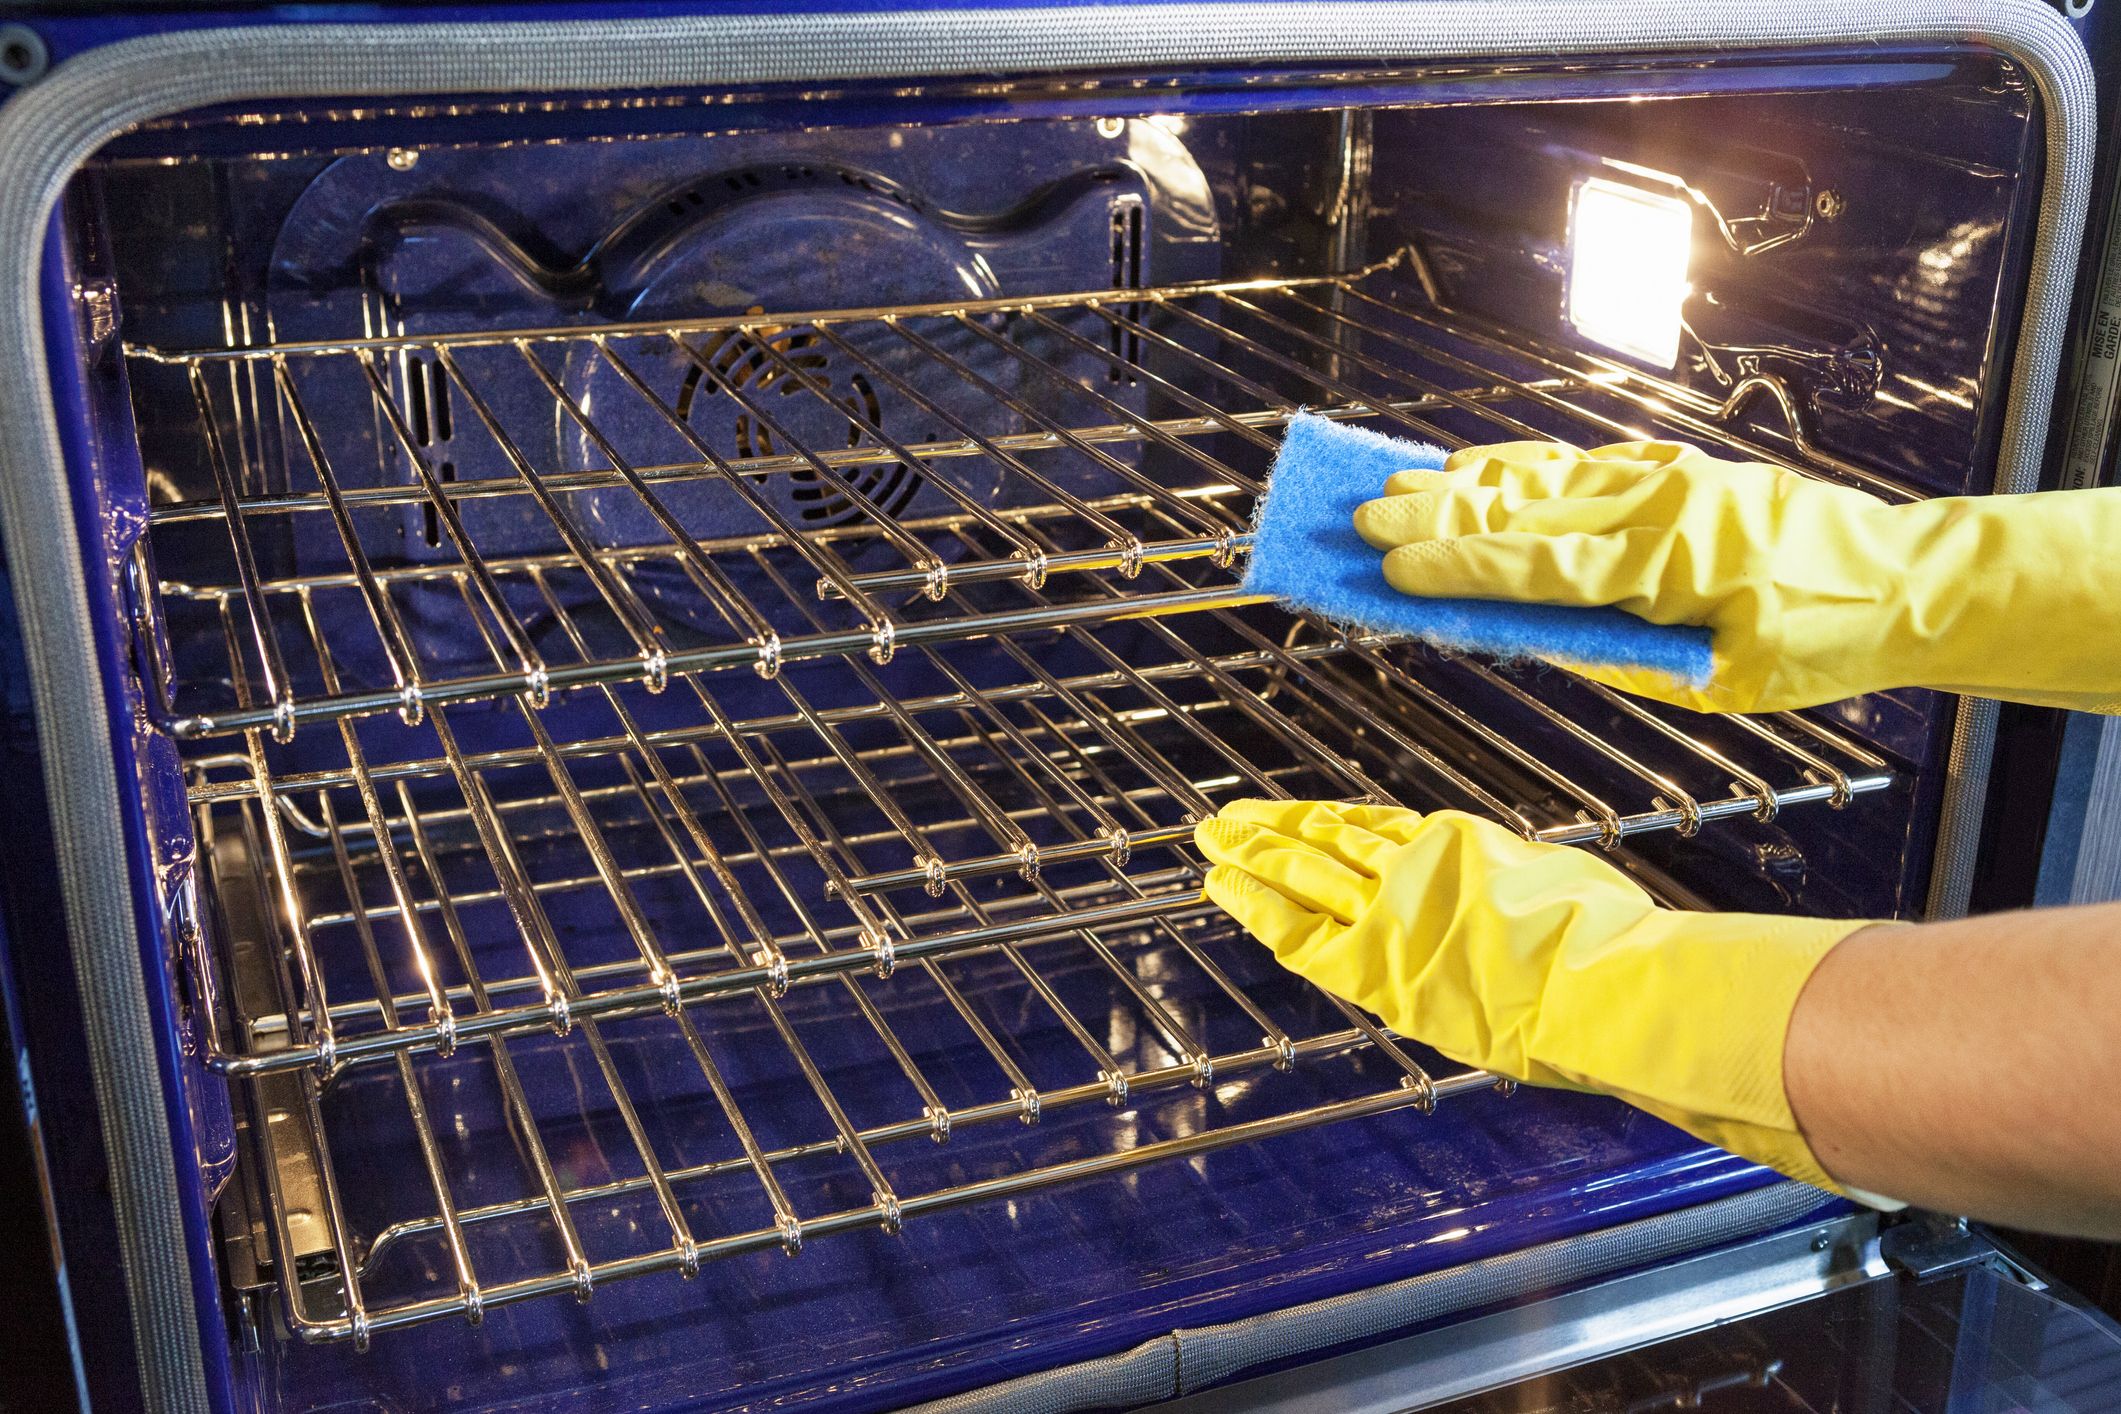 How to Clean an Oven, According to Experts - Best Way to a Clean Oven